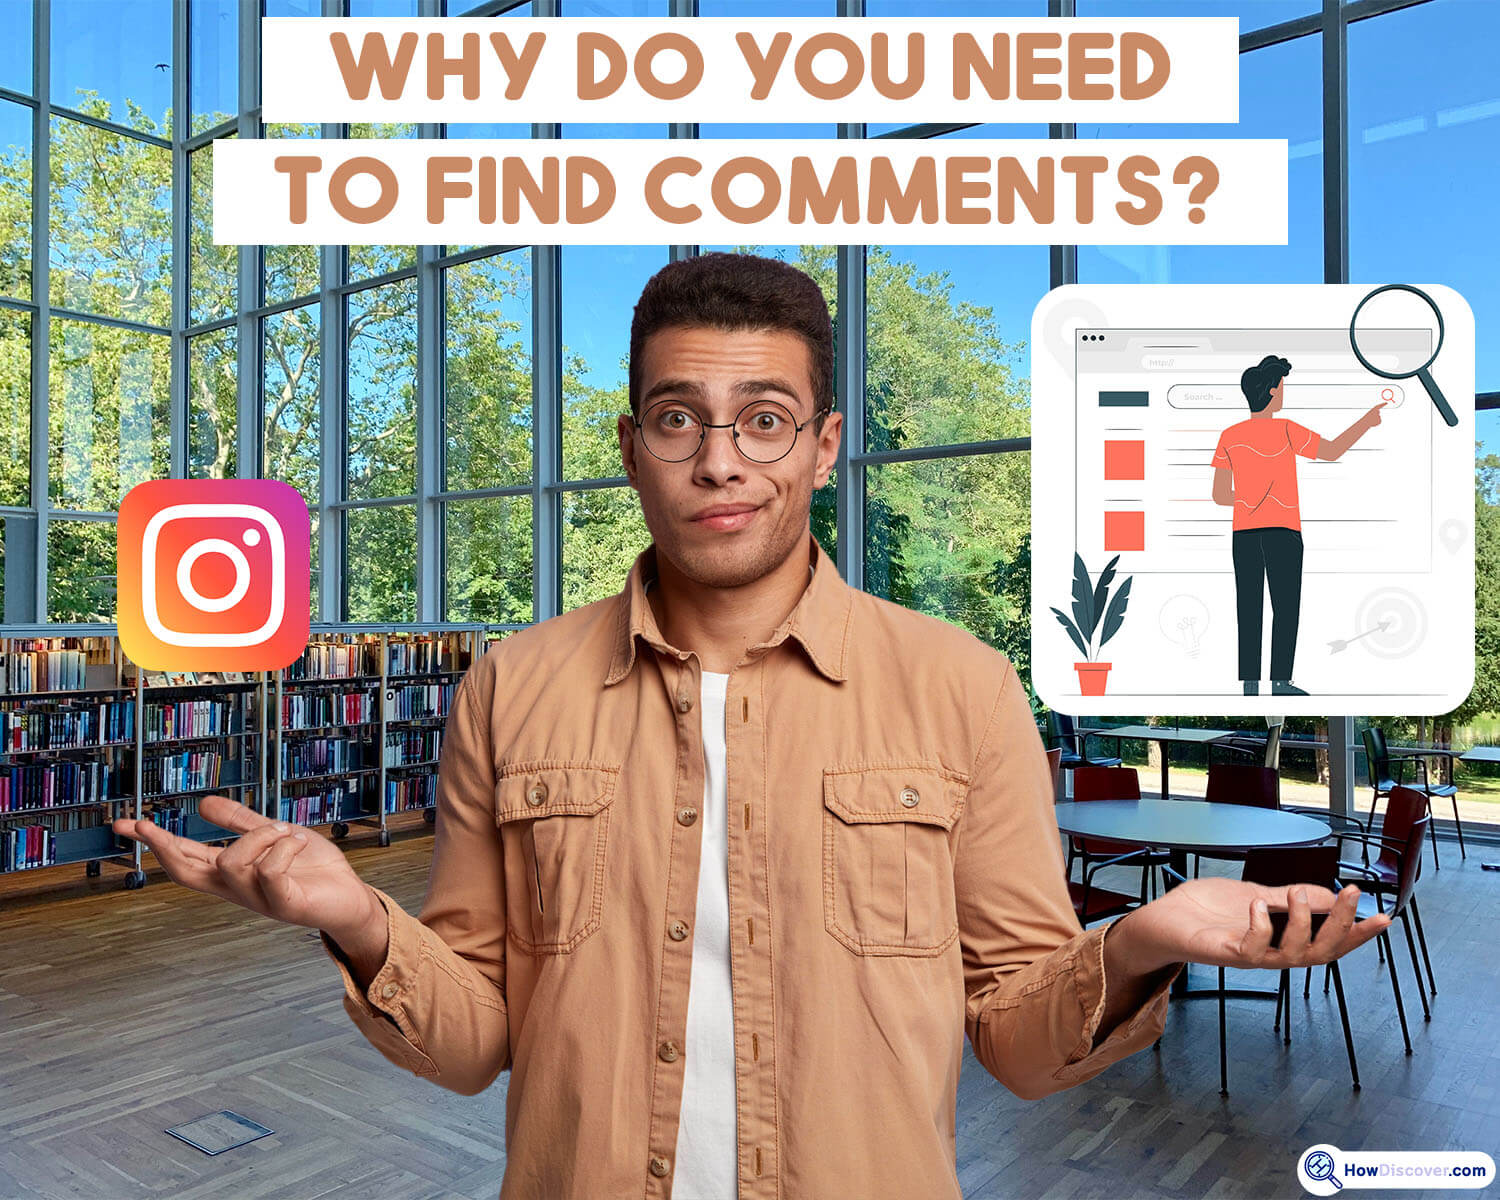 Why do you need to find comments on Instagram - How to Search For Comments on Instagram